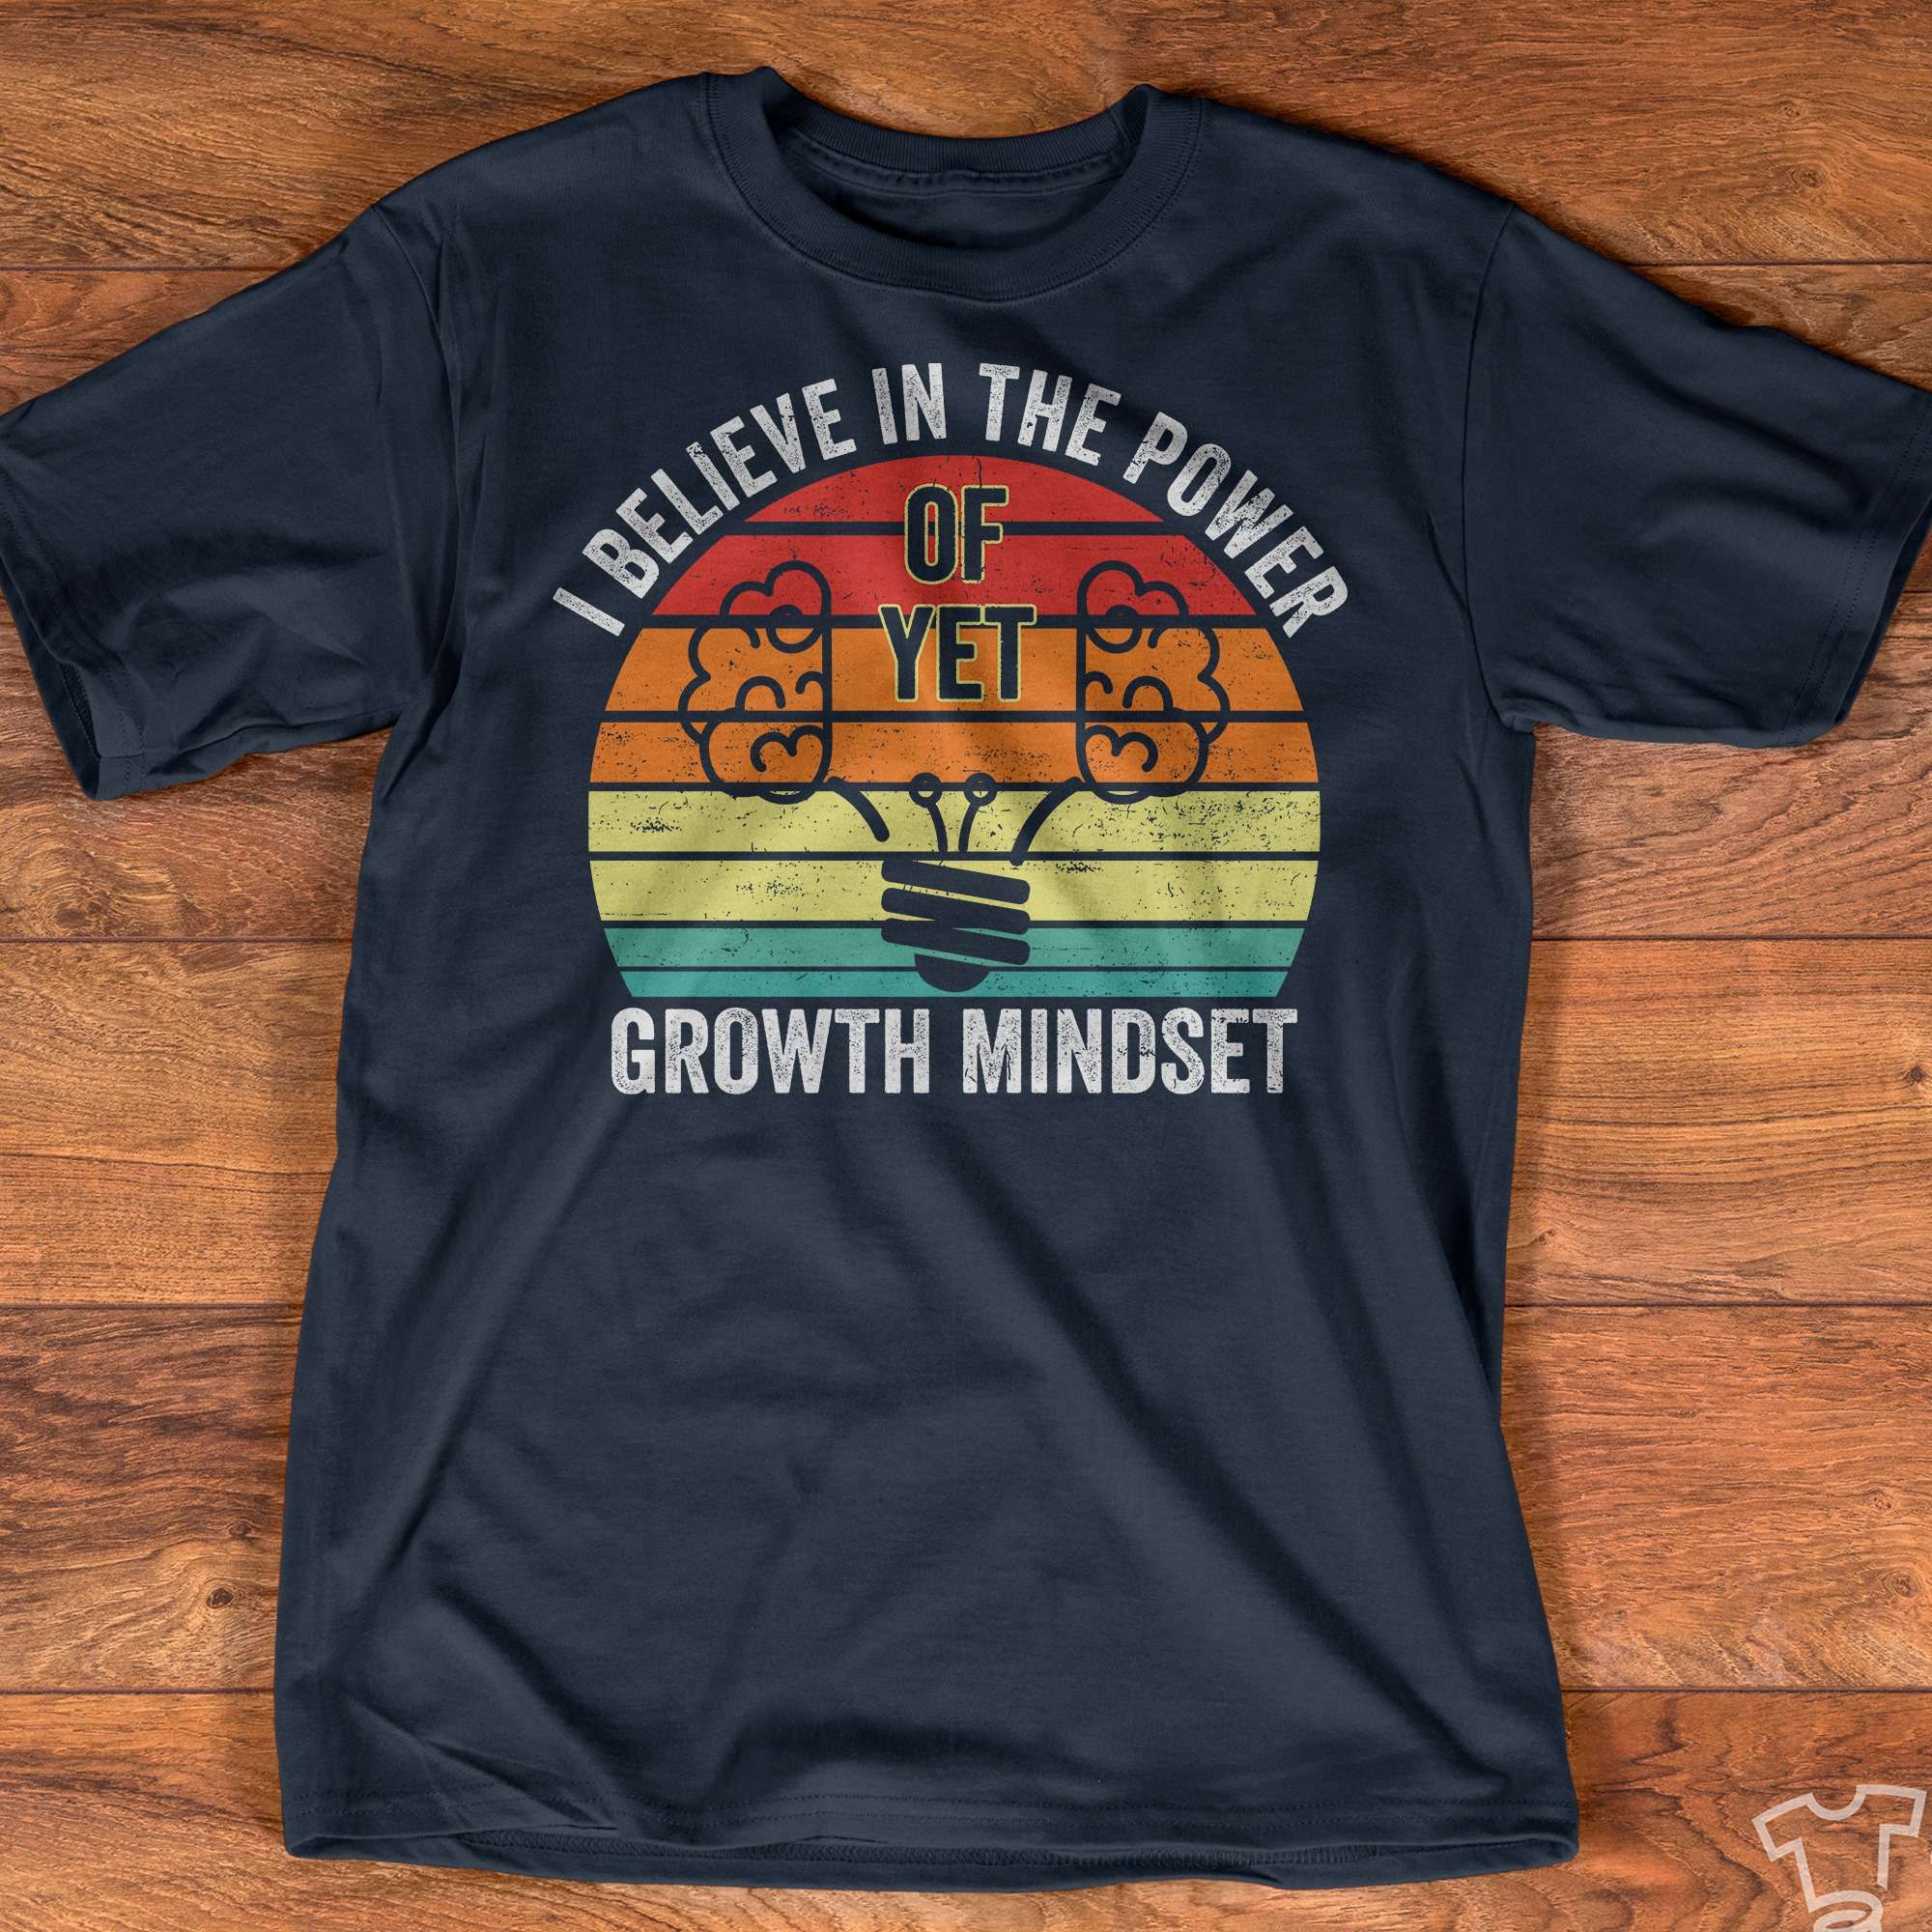 I believe in the power of yet growth mindset - Growth Mindset teacher, teacher T-shirt gift